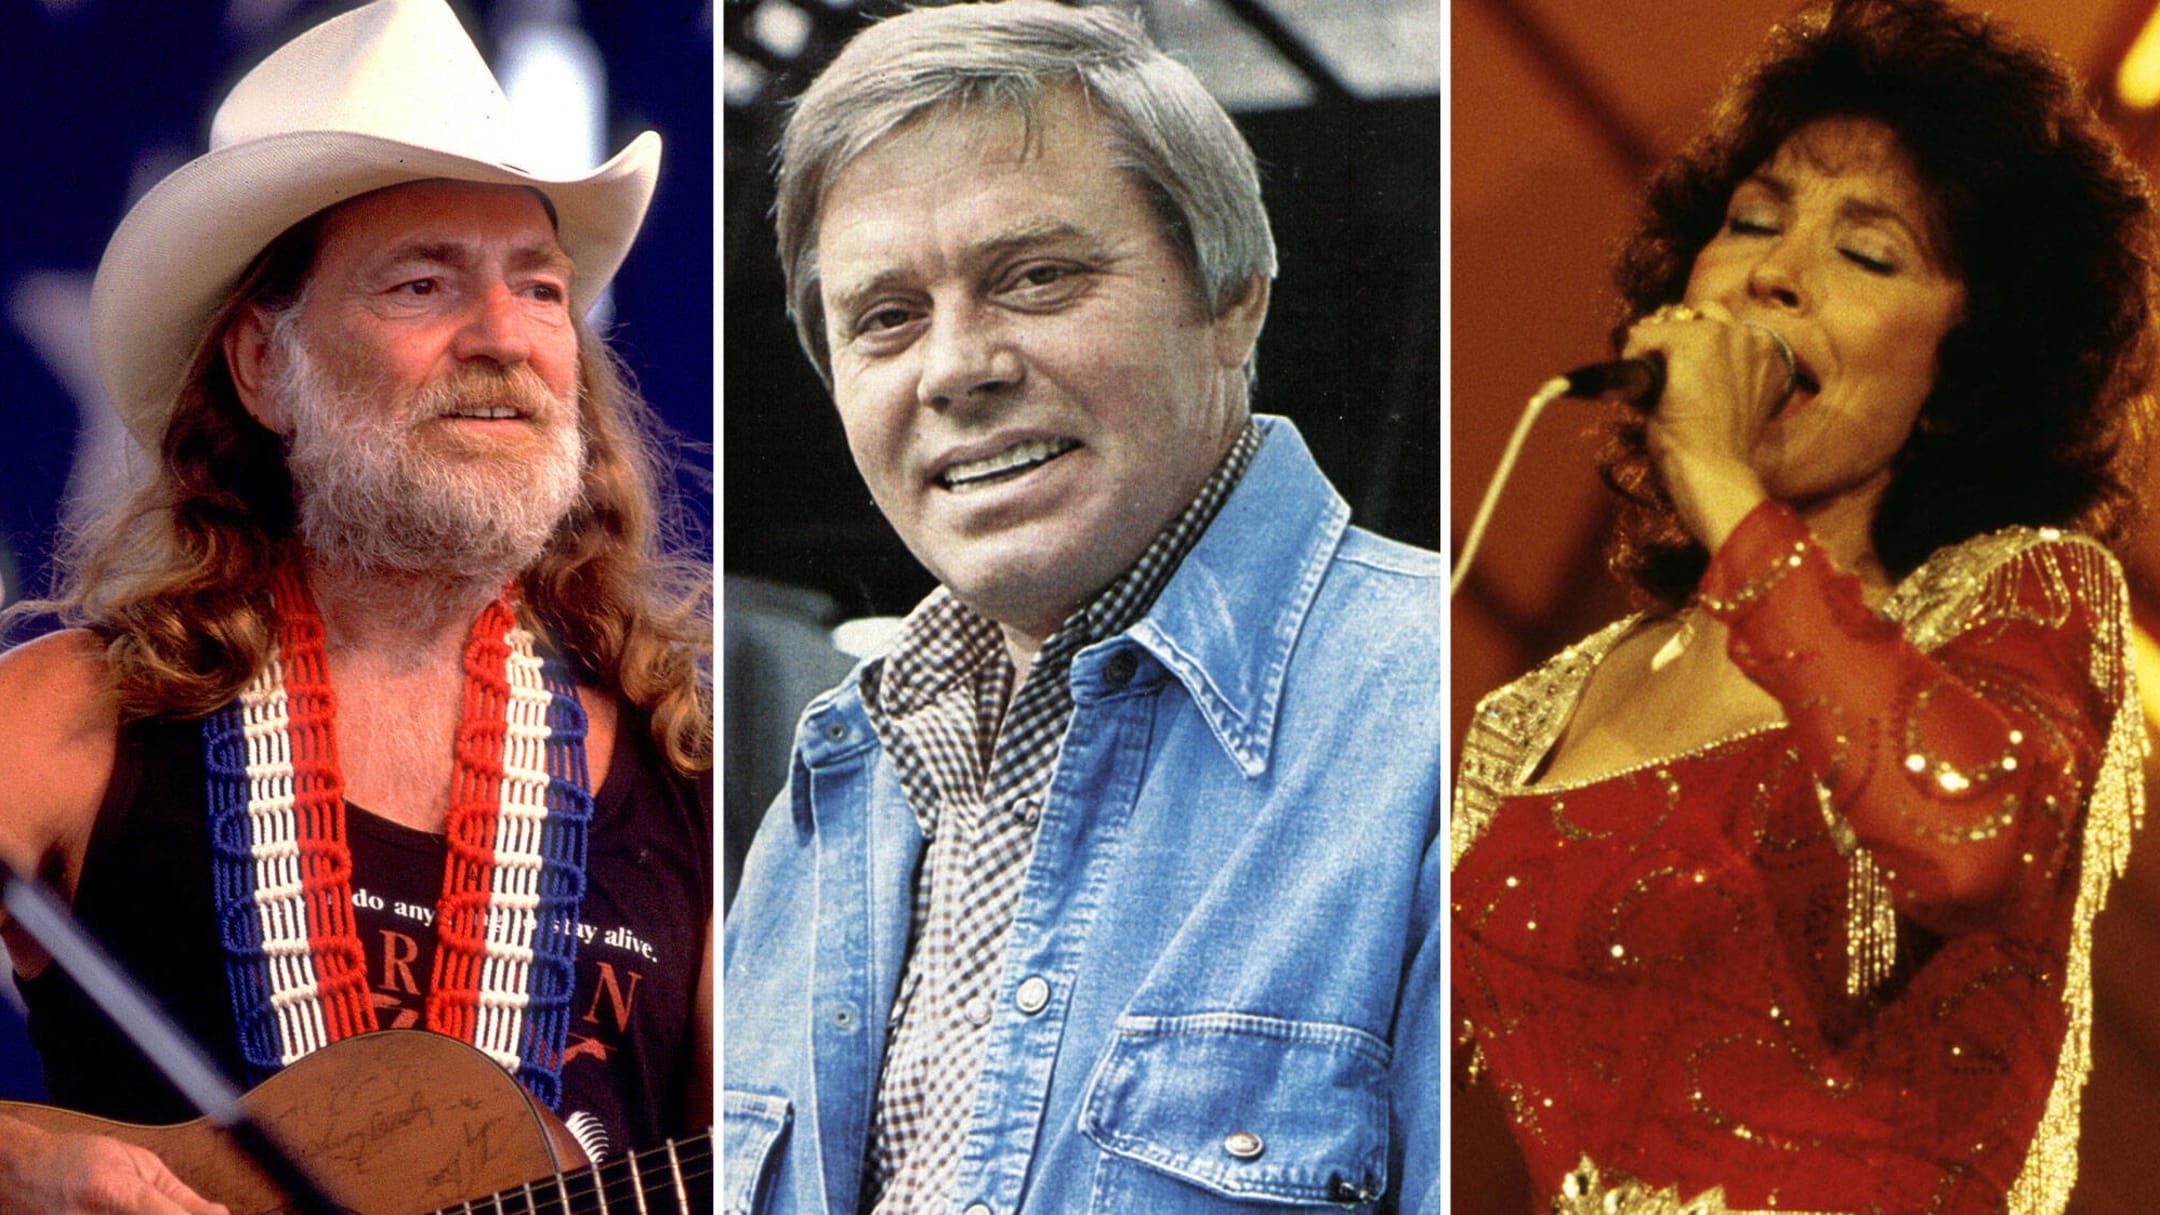 The 20 most iconic country music songwriters